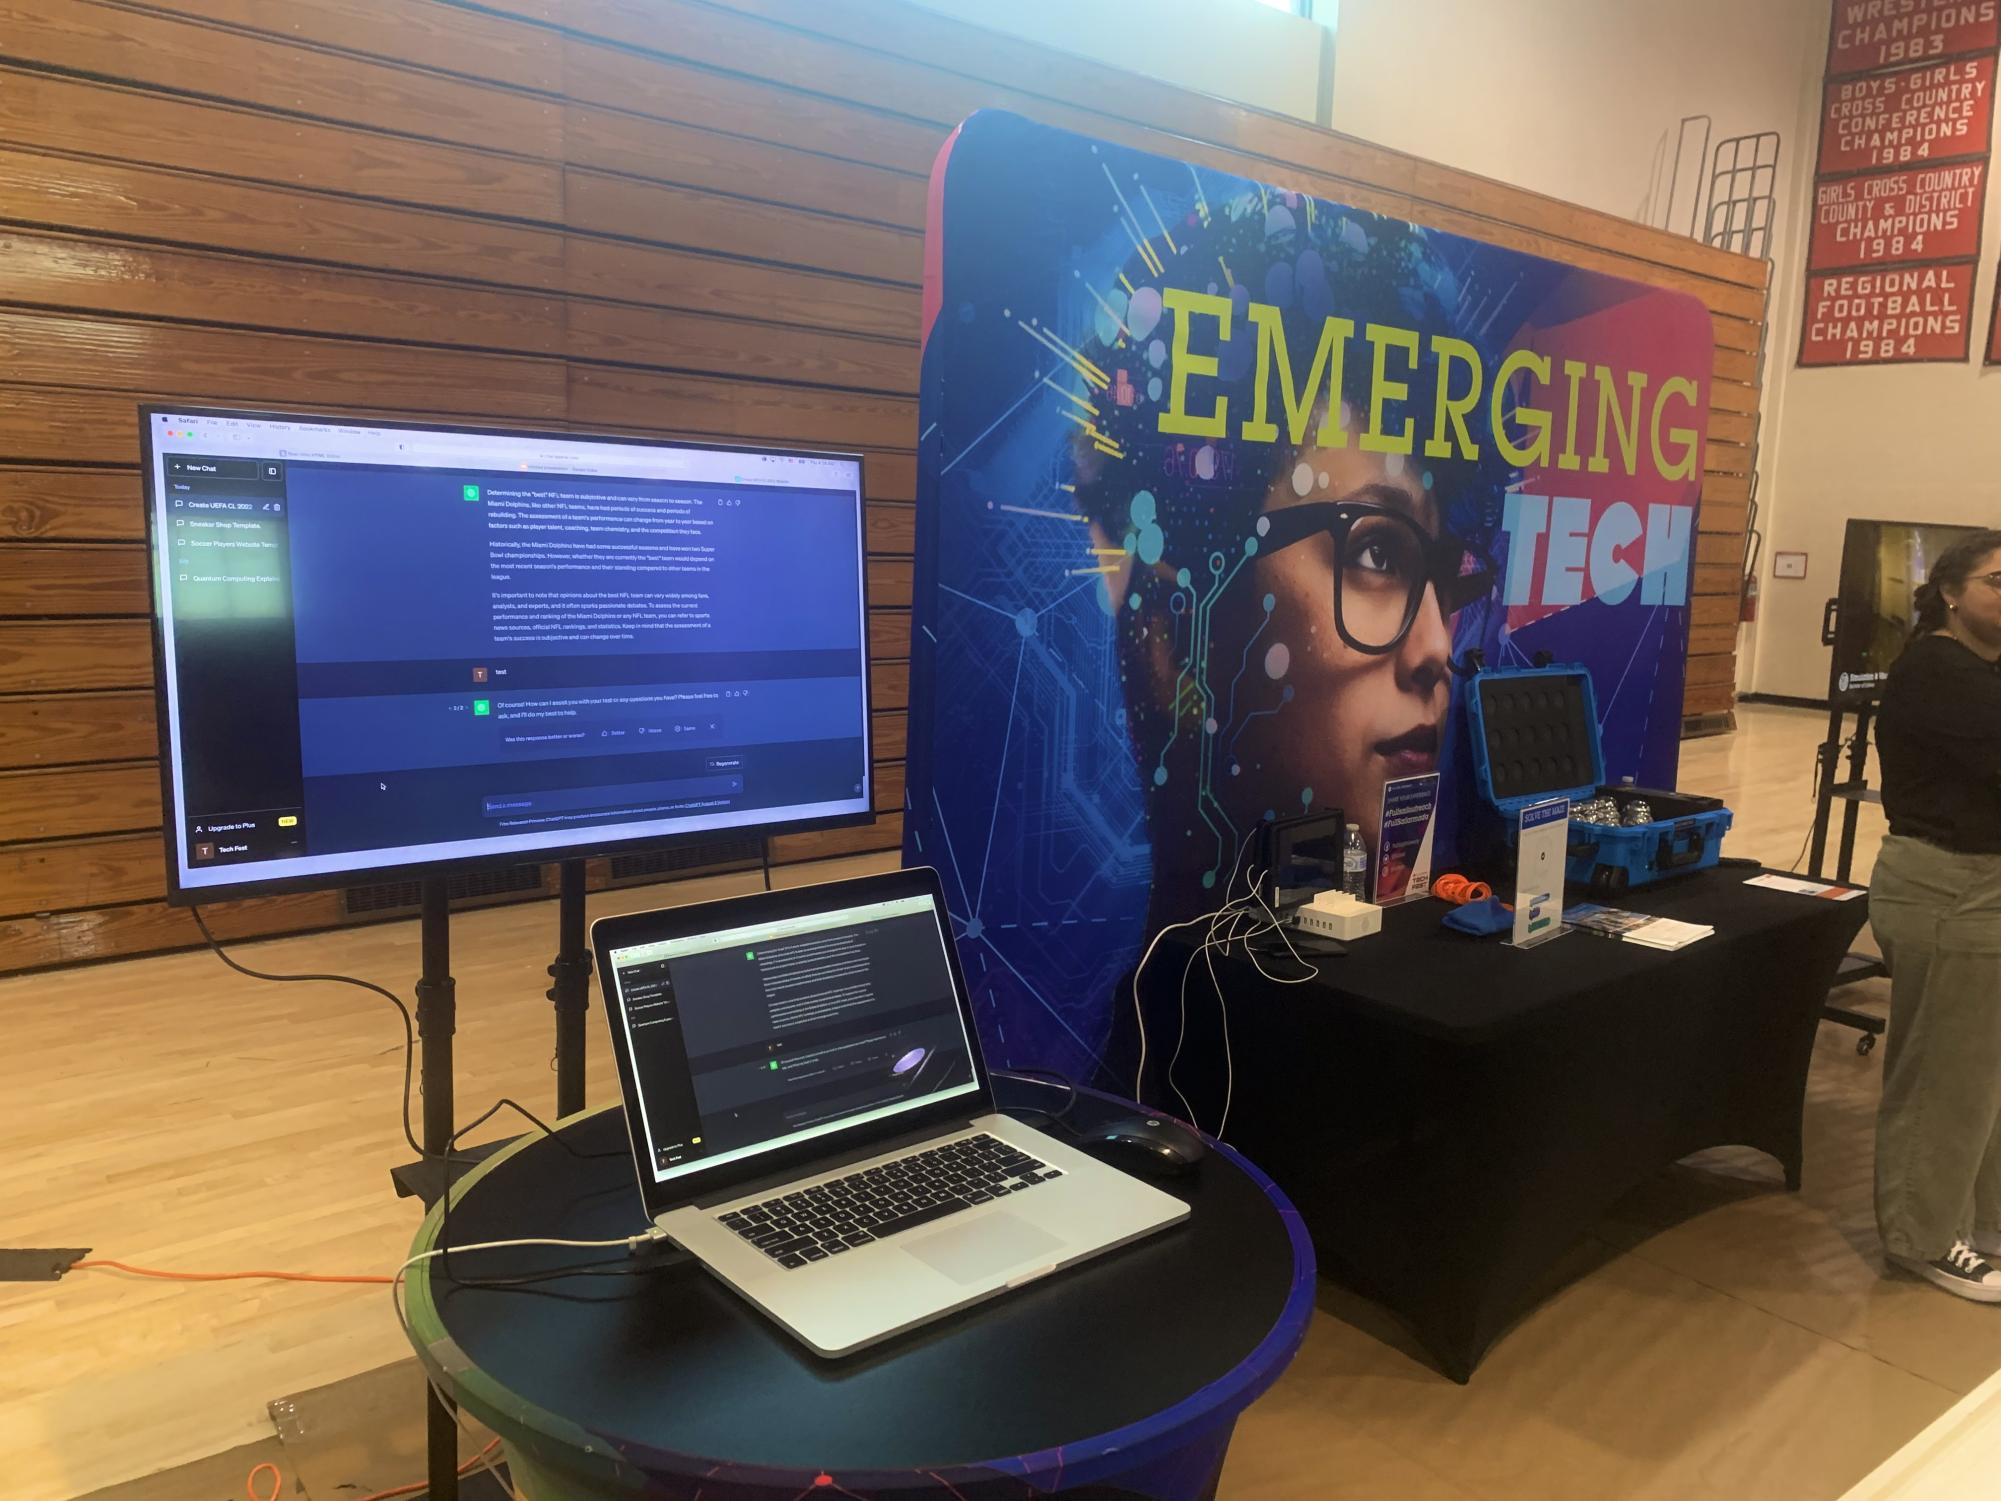 The Emerging Tech booth at Tech Fest!